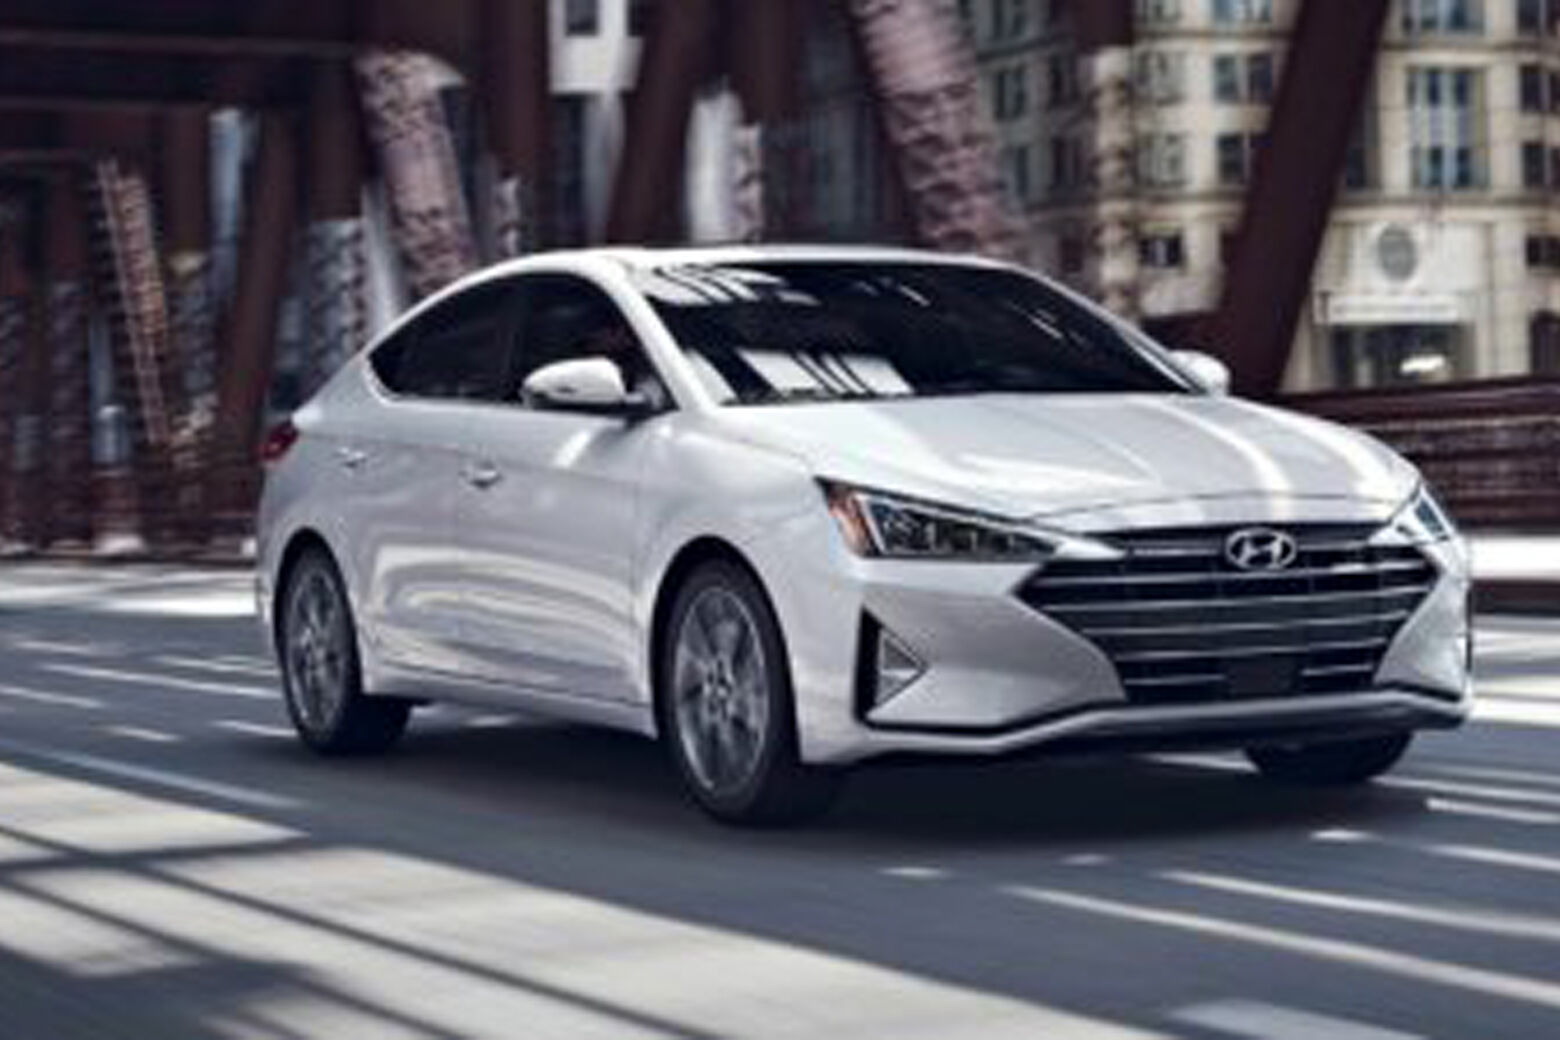 <p><strong>2020 Hyundai Elantra</strong></p>
<p><strong>Lease Deal: </strong>As low as $119 per month for 36 months with $2,970 due at signing</p>
